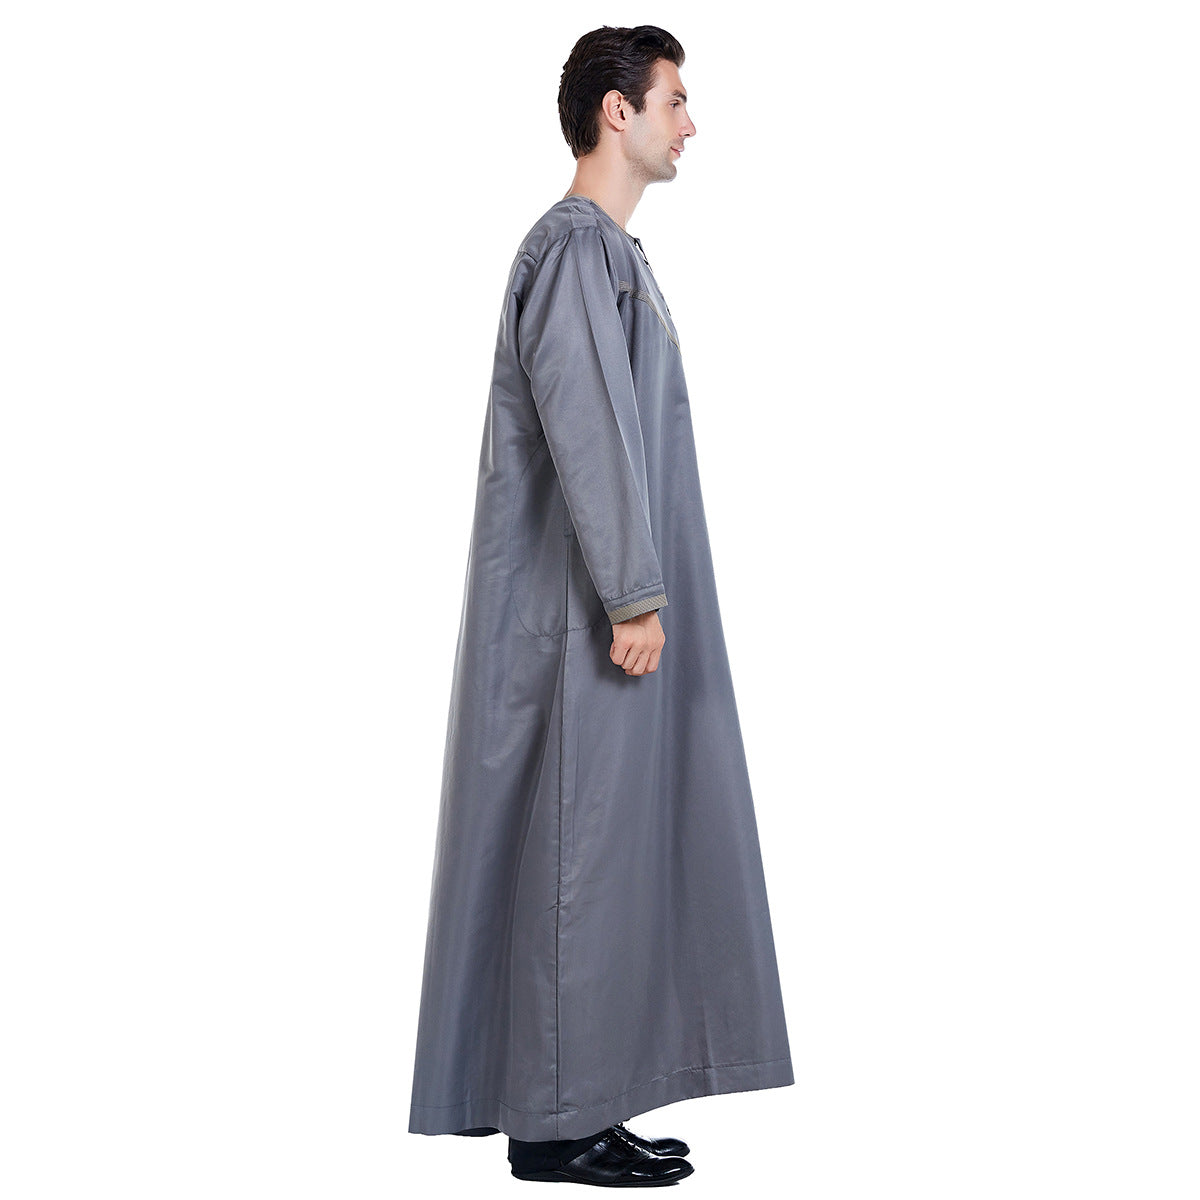 Introducing the Emirati Men's Thobe in Grey, a captivating and versatile garment that effortlessly combines traditional Islamic elegance with Modest Clothing style. This meticulously crafted thobe is designed to enhance your appearance and offer unrivaled comfort, making it a perfect choice for any occasion.